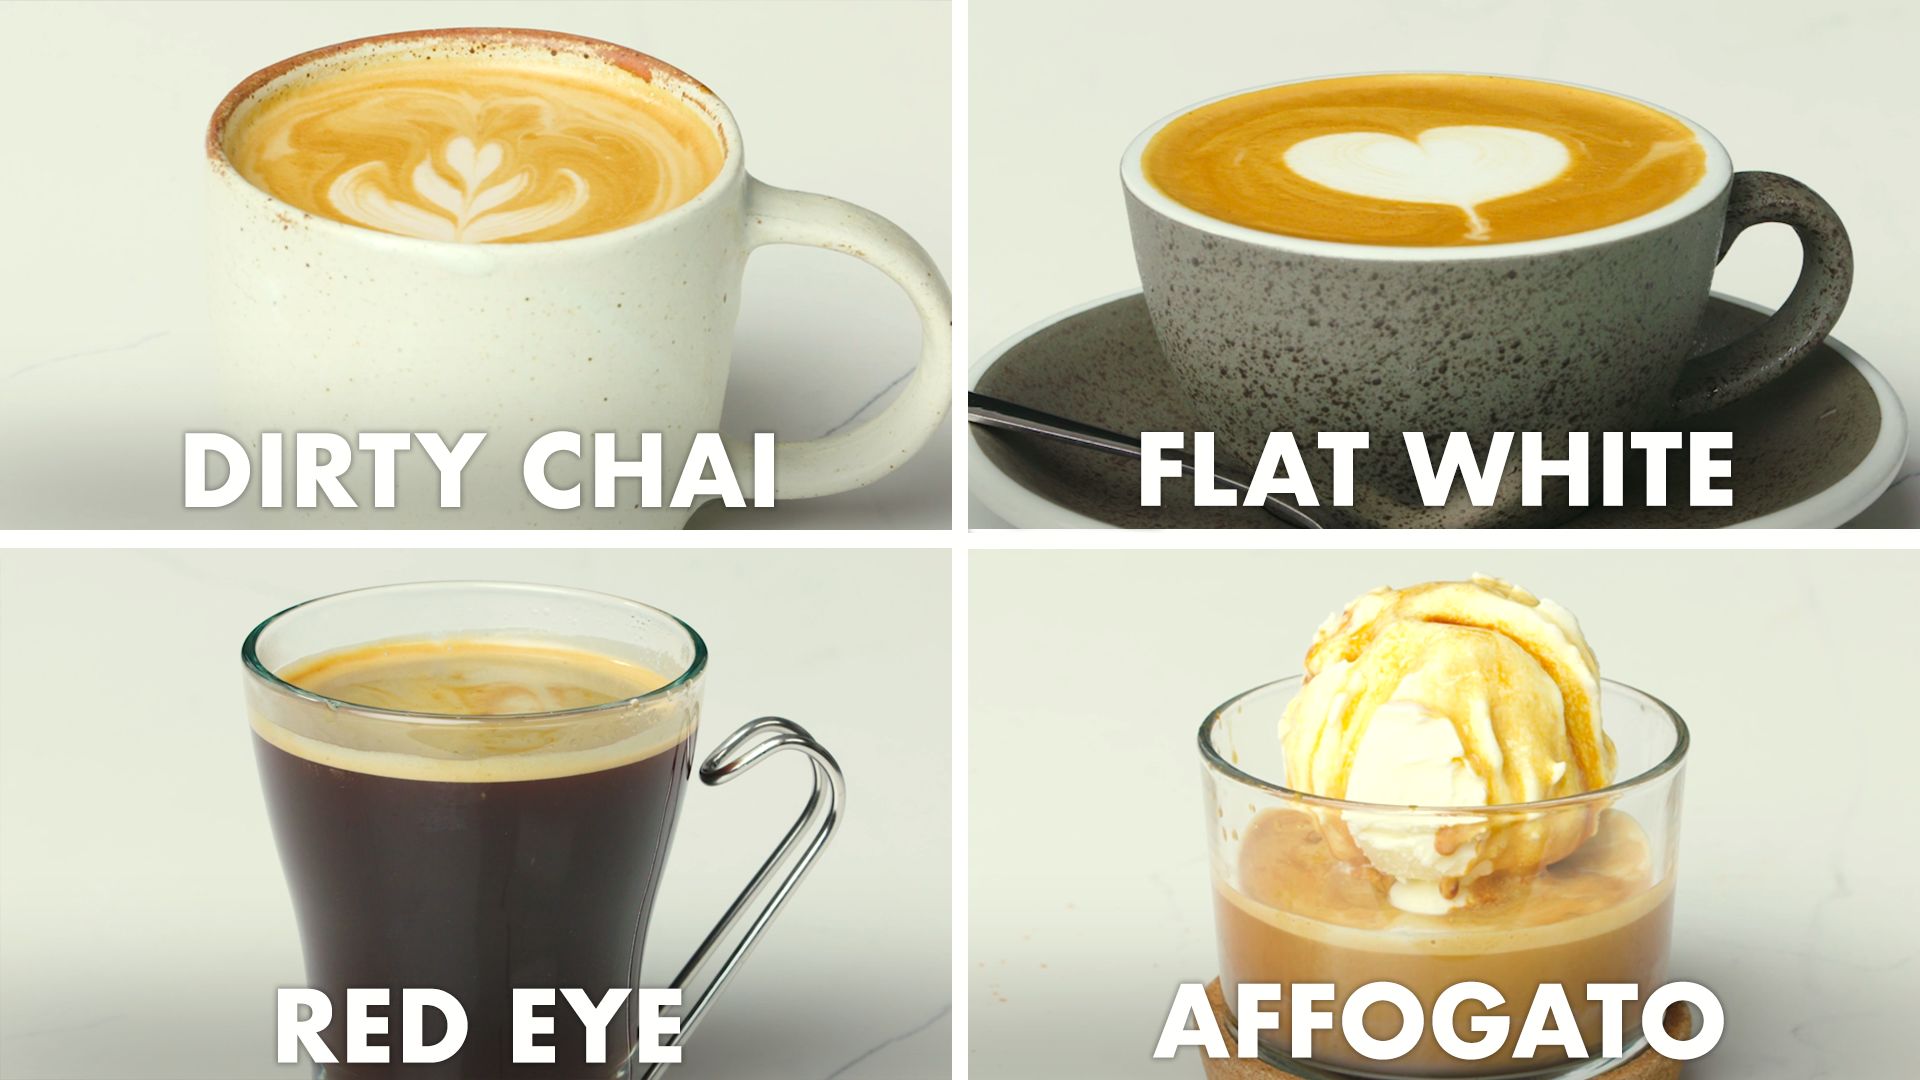 What Baristas and Coffee Experts Actually Order at Coffee Shops